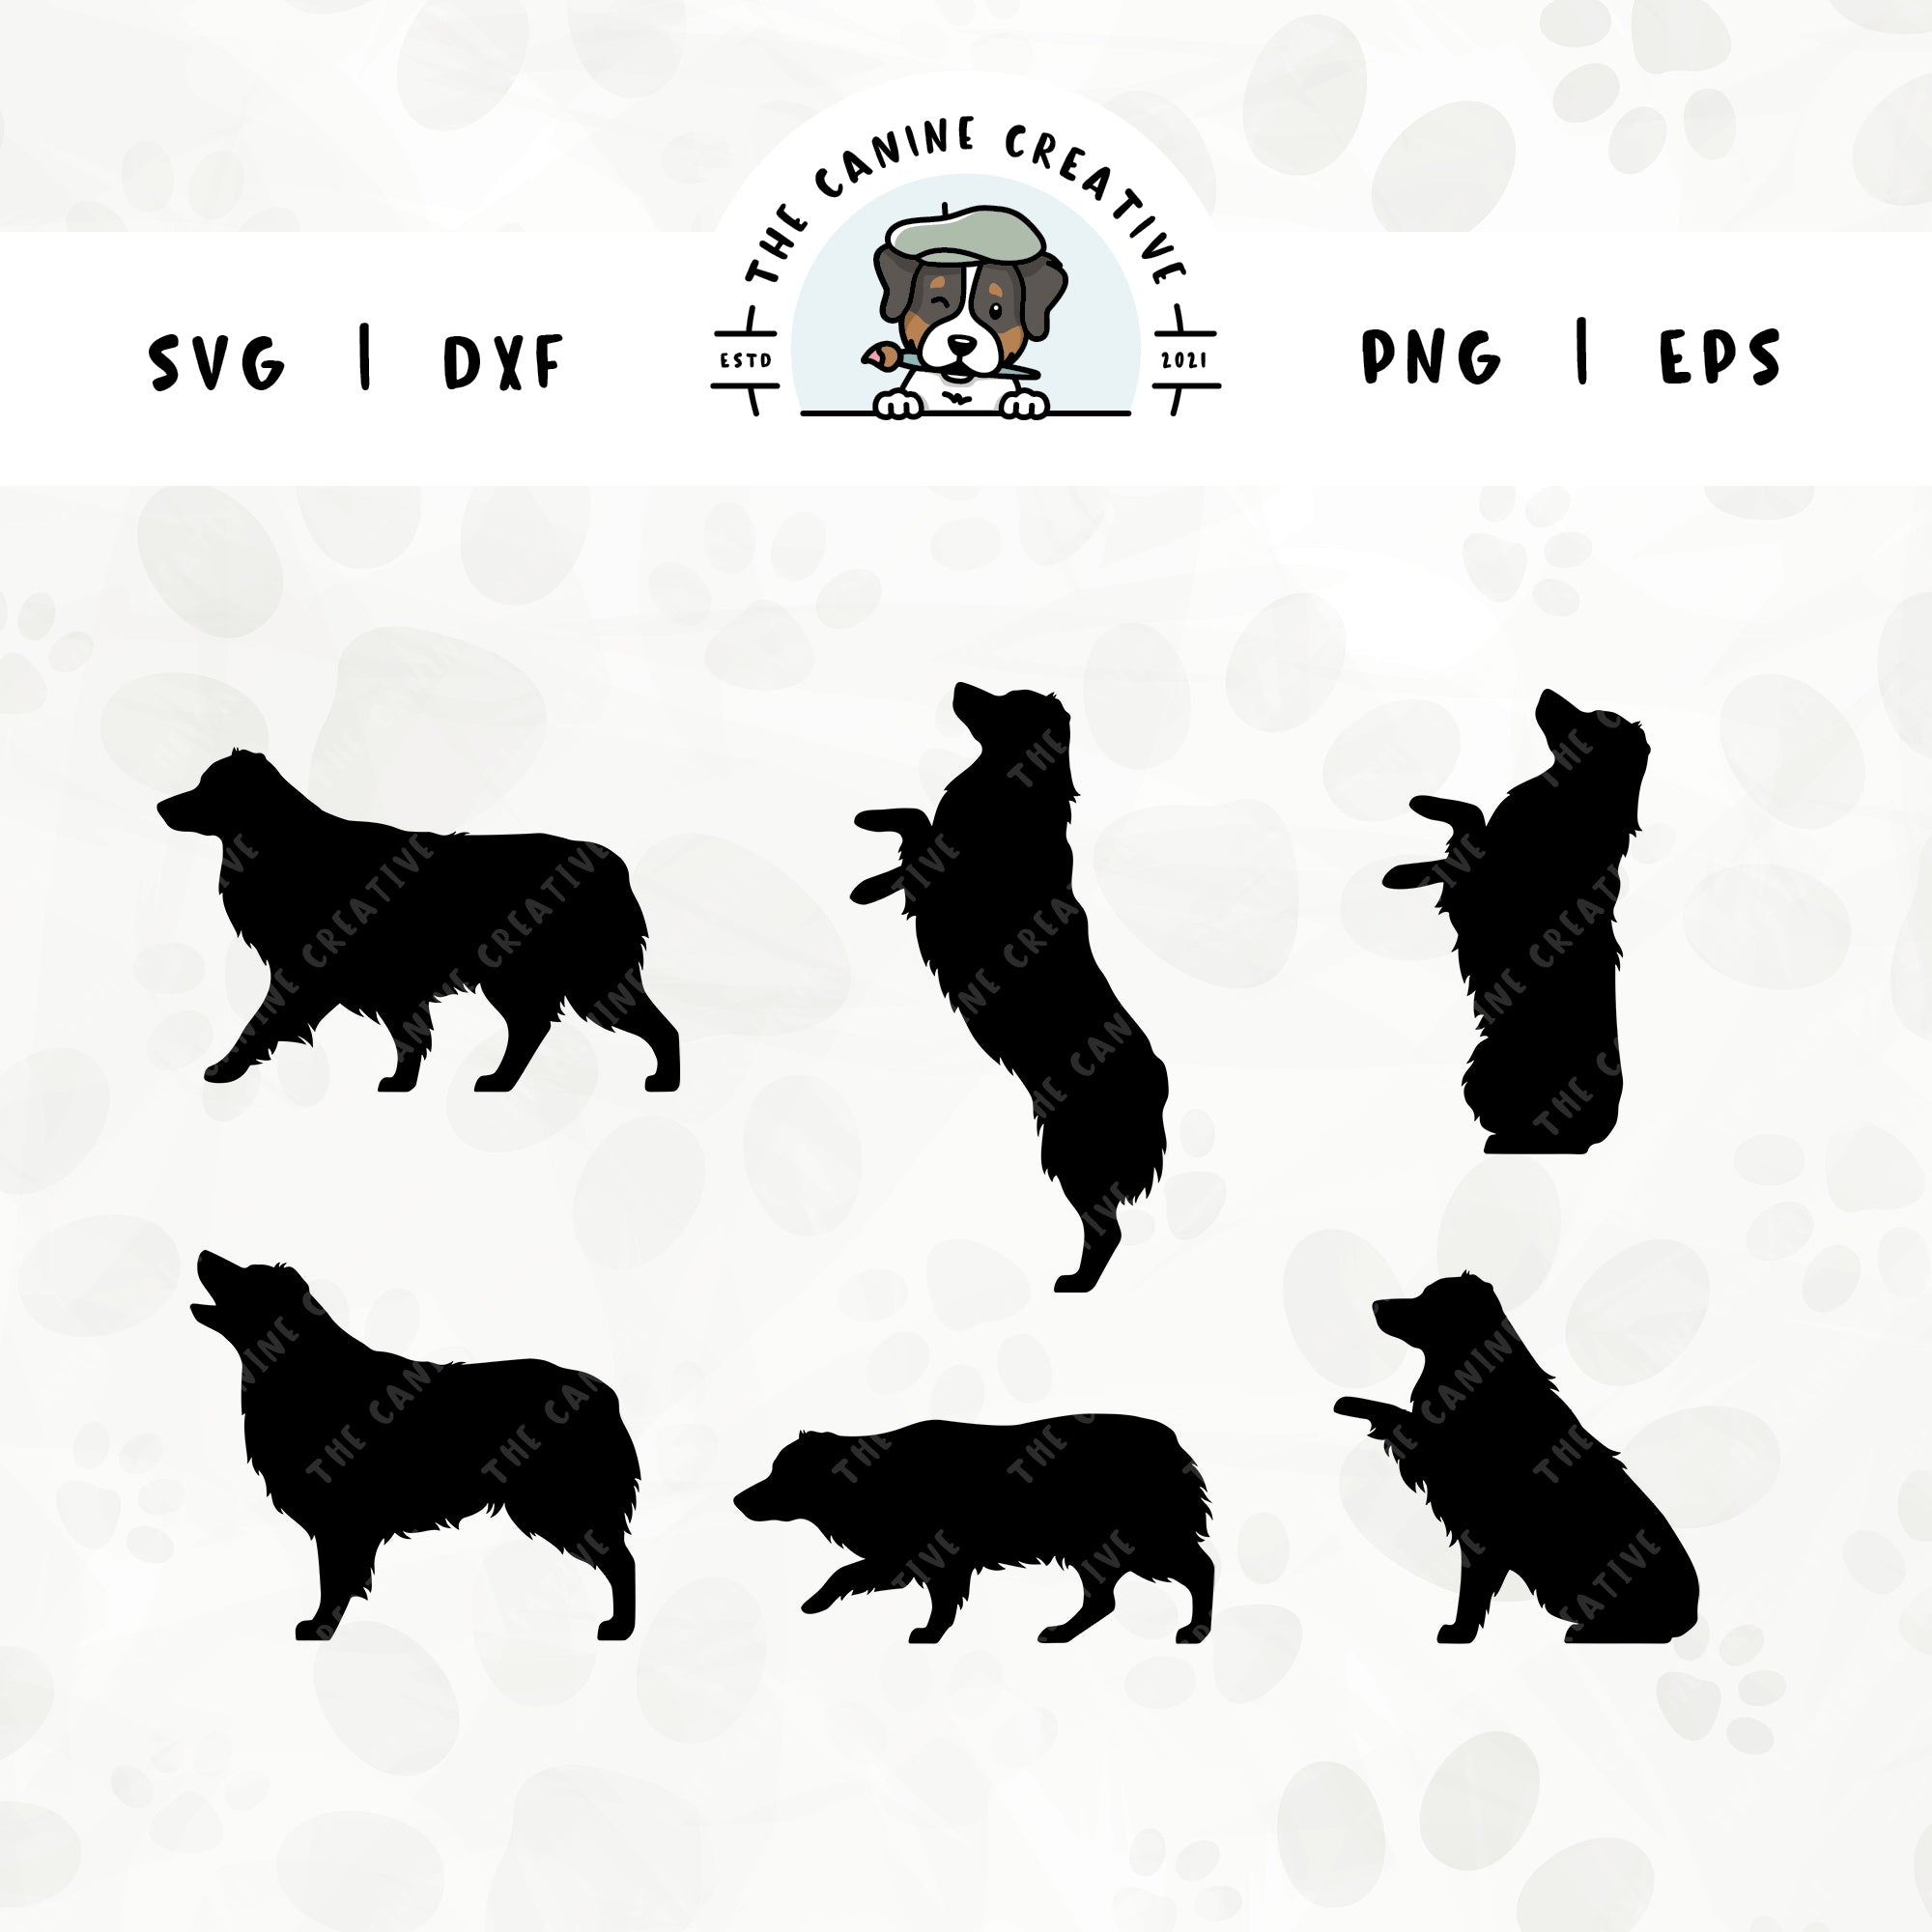 This 6-pack, docked tail Australian Shepherd silhouette bundle (set 2) features various dog poses including walking, herding, jumping up, begging, barking, and shaking a paw. File formats include: SVG, DXF, PNG, and EPS.